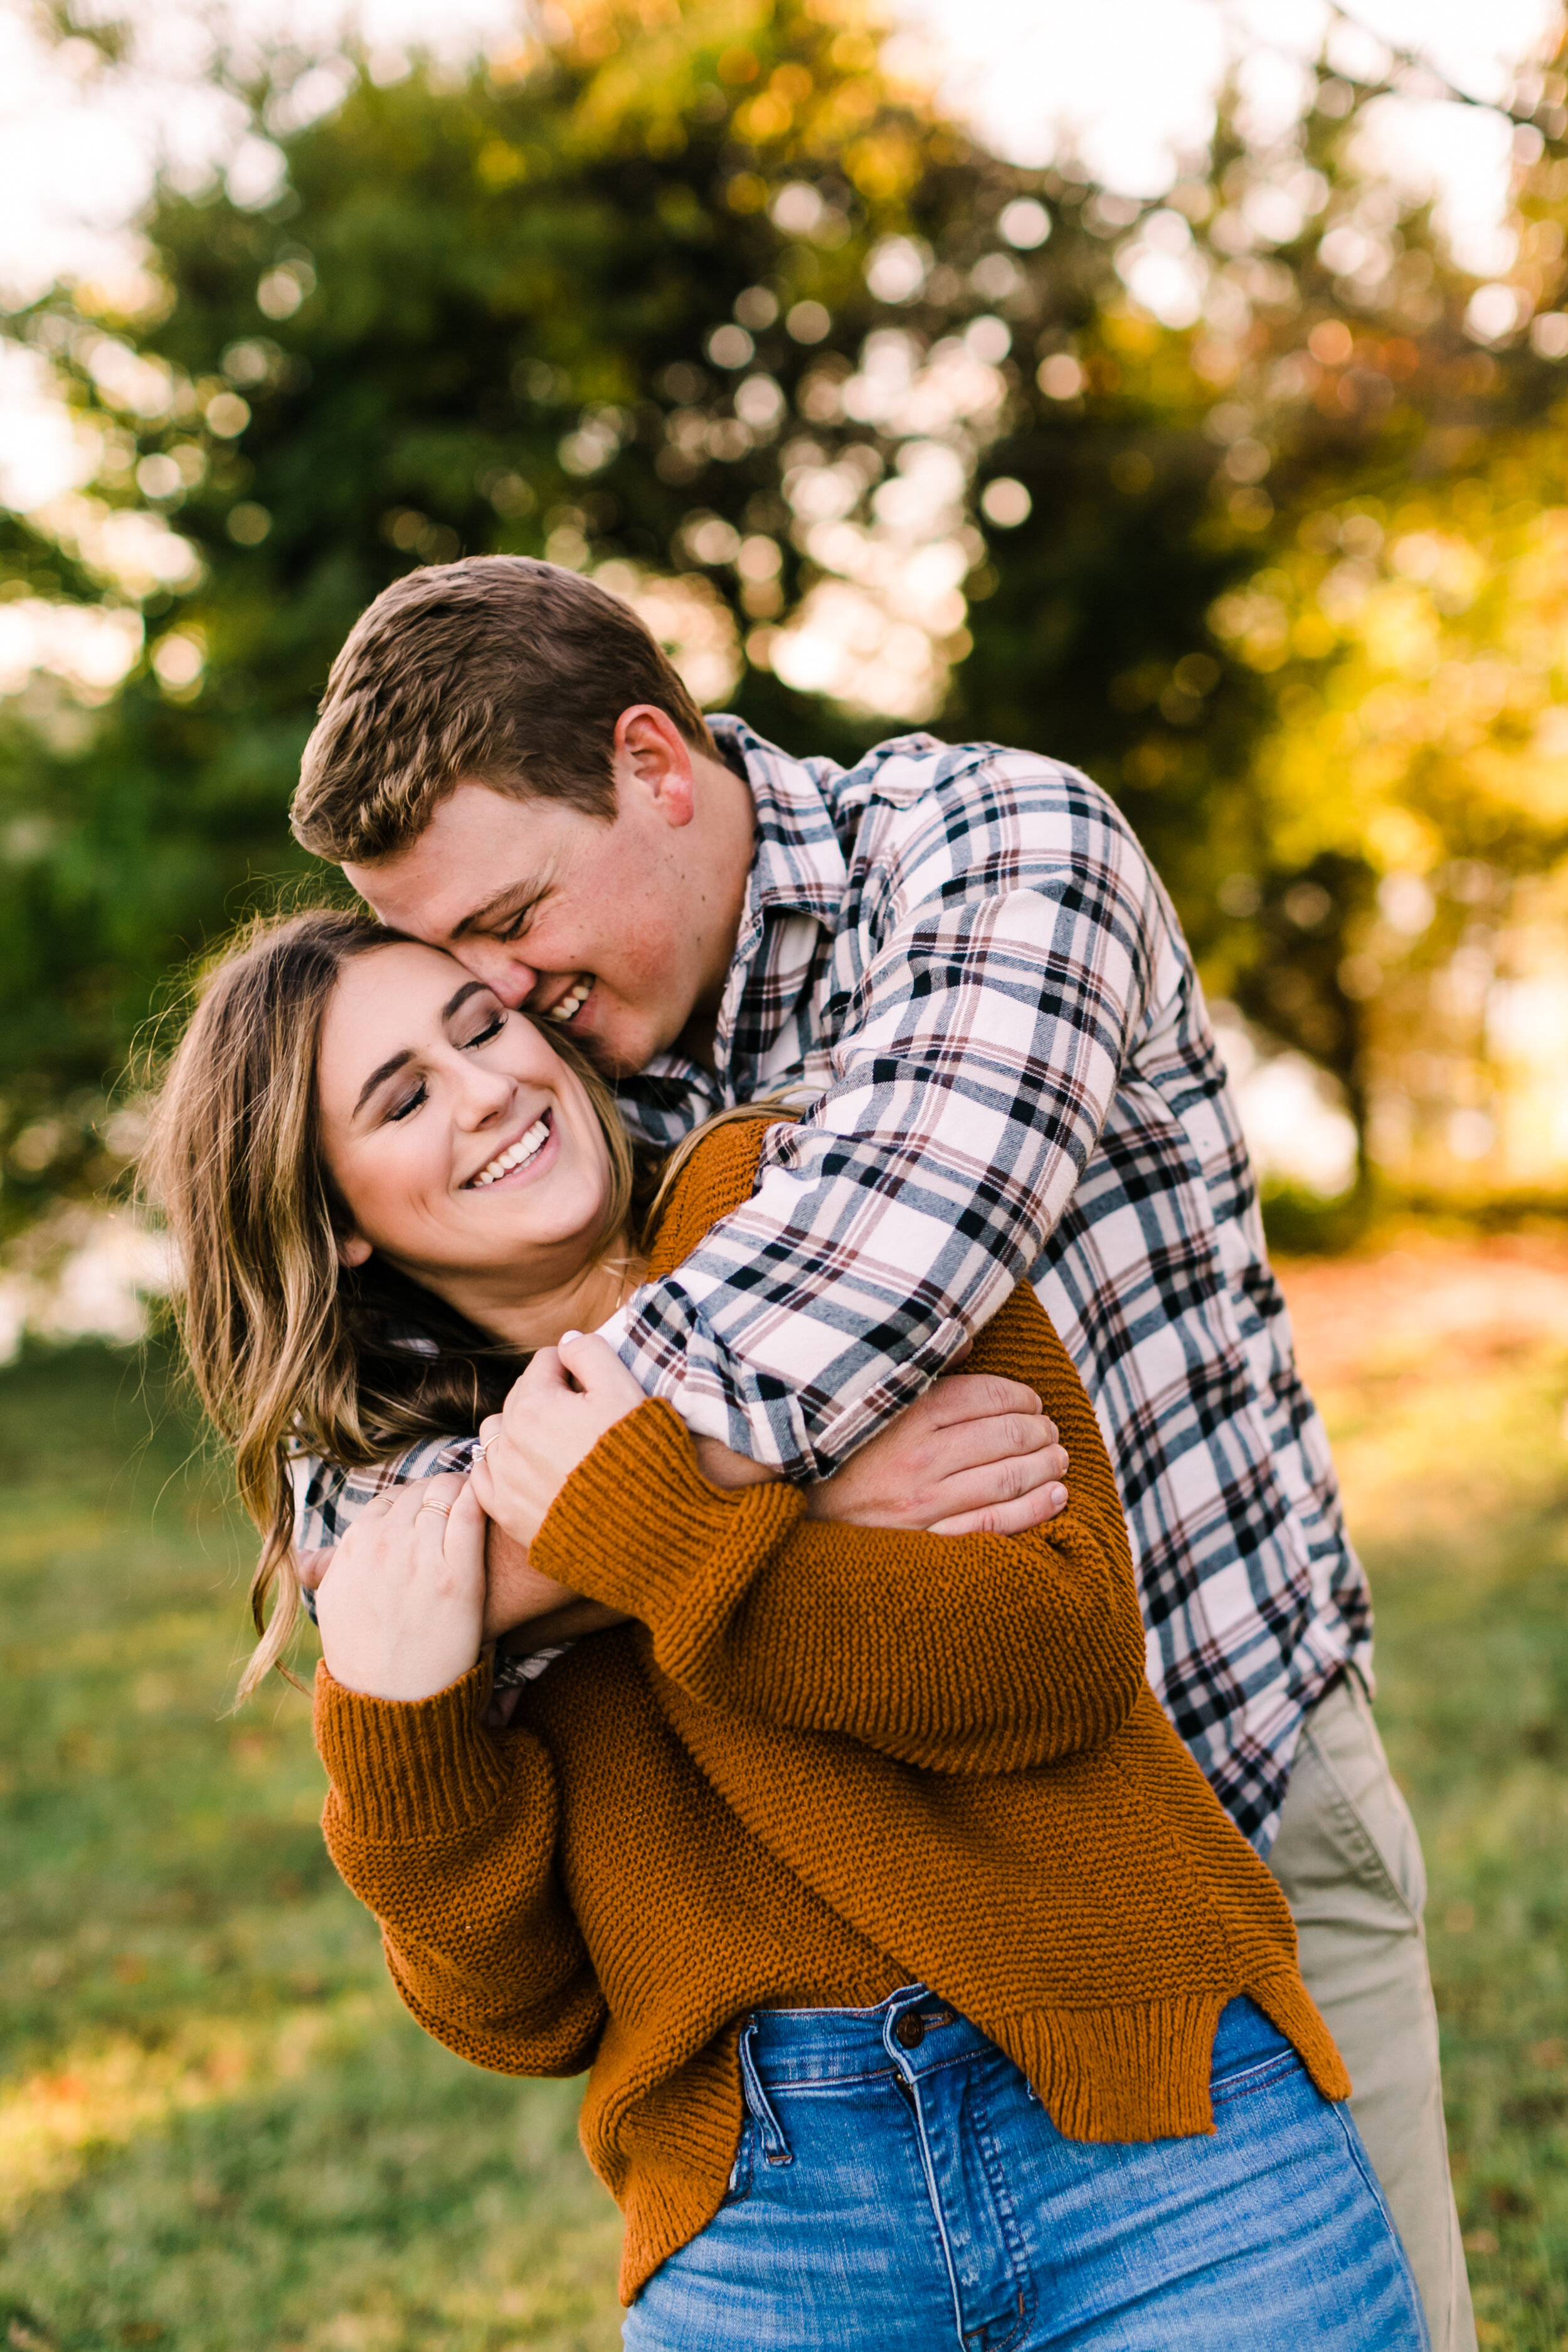 Tennessee+Fall+Engagement+Photos+Puppy (40 of 63).jpg